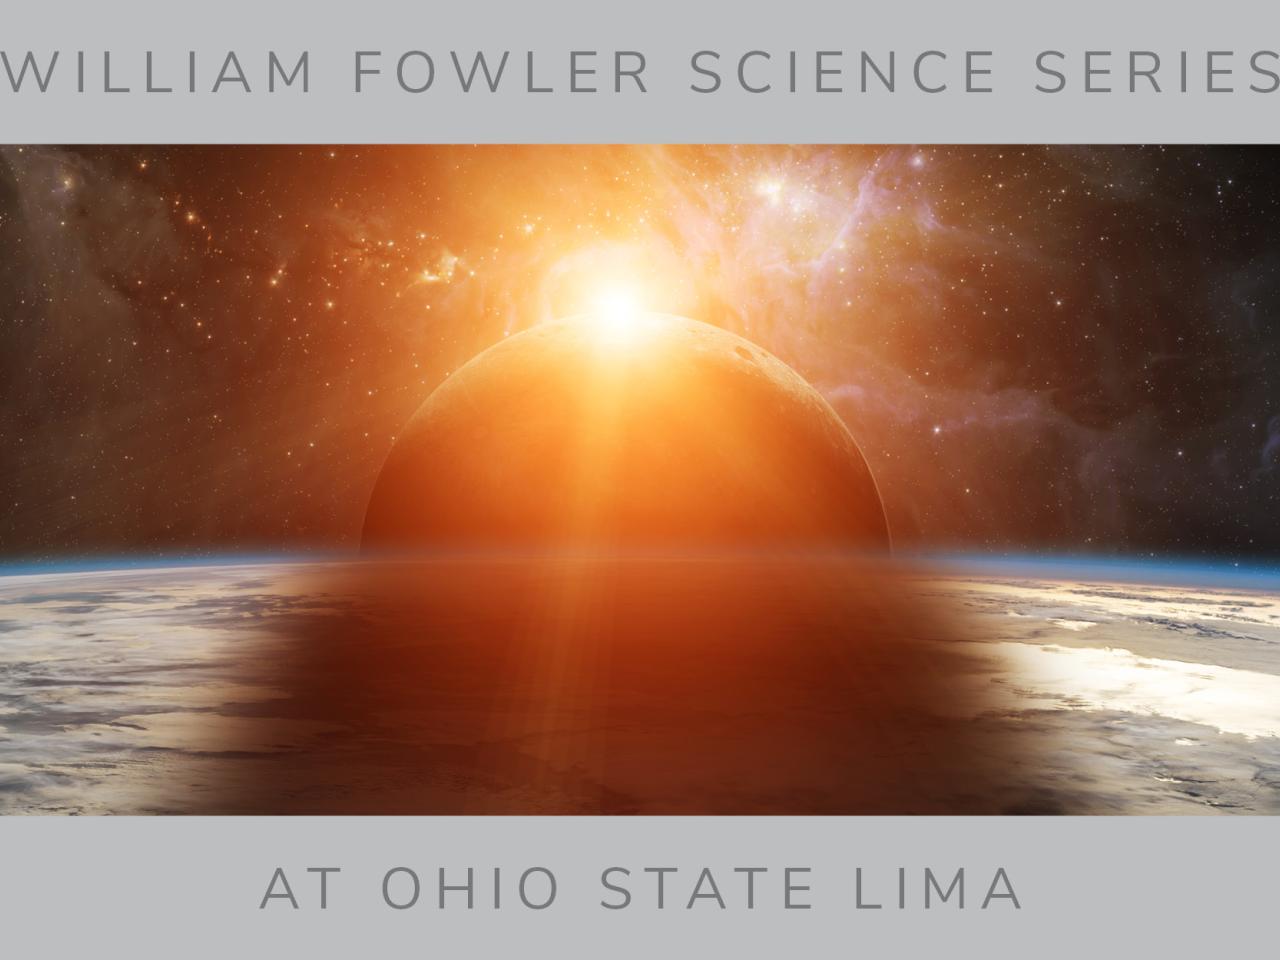 Fowler Science Series with eclipse